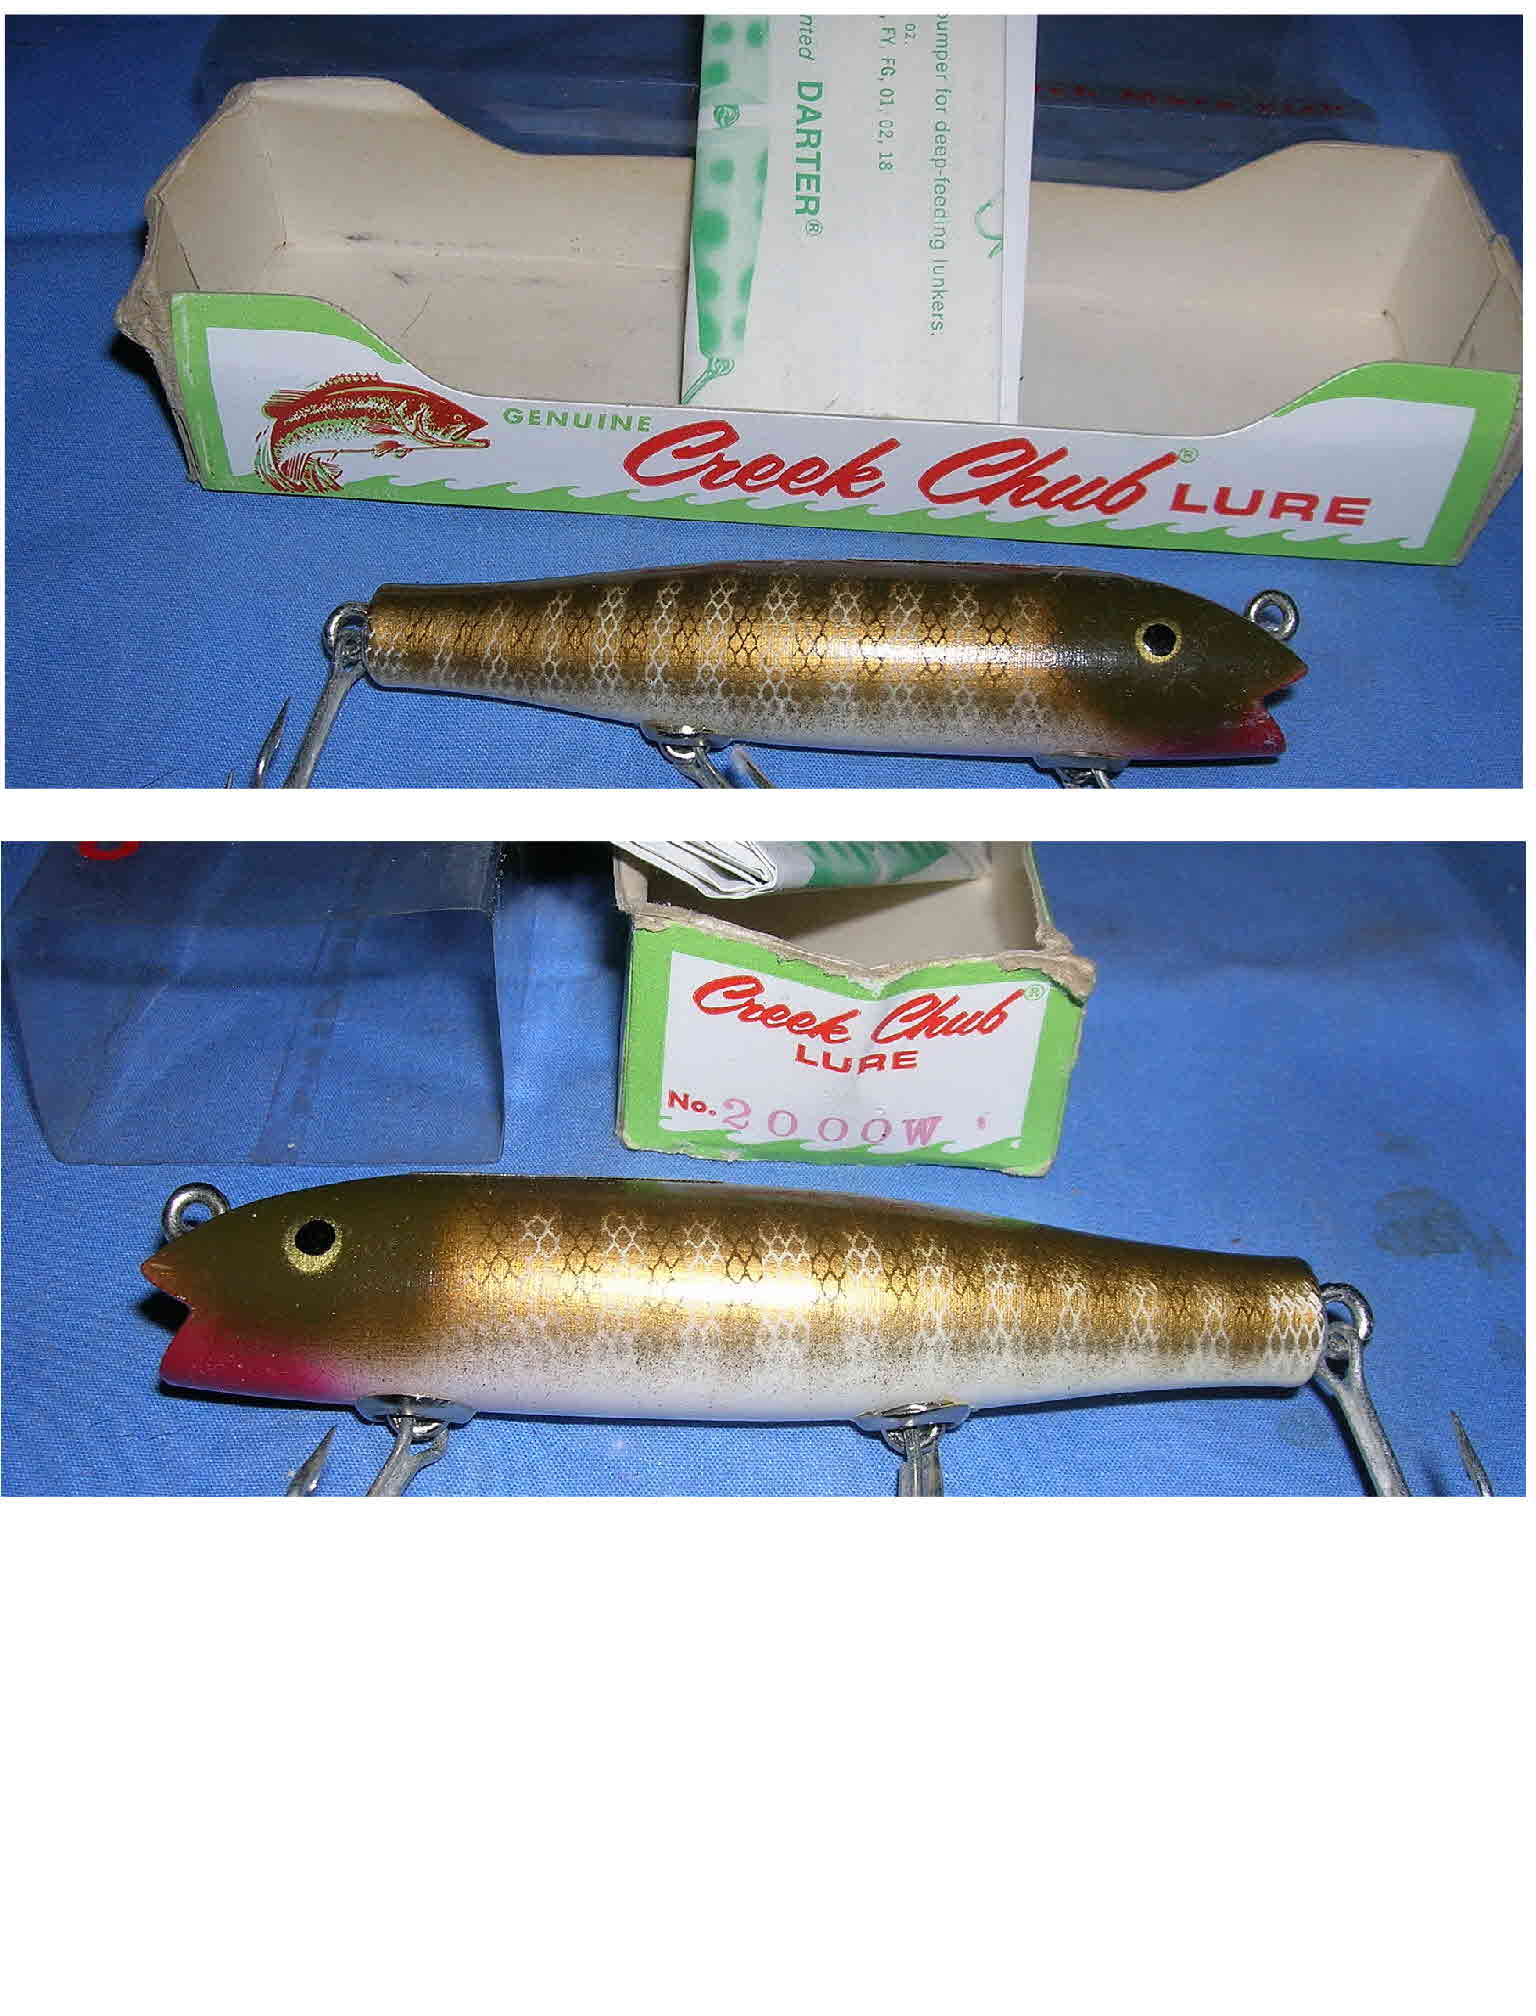 https://www.fishingcollectables.com/images/cc597.jpg